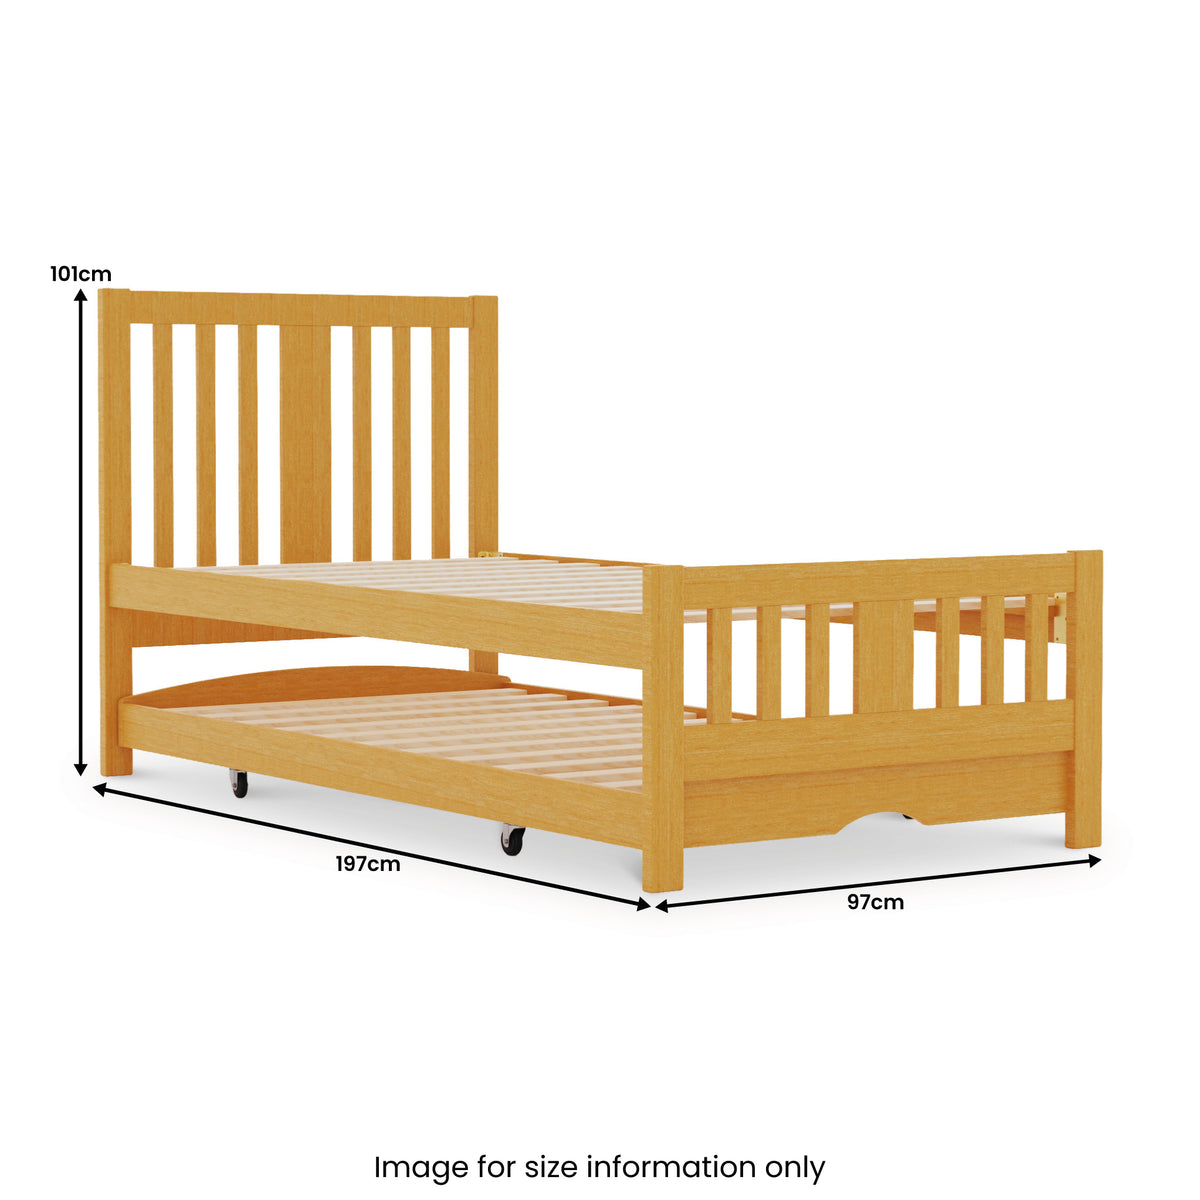 Finchley Guest Bed with Trundle dimensions